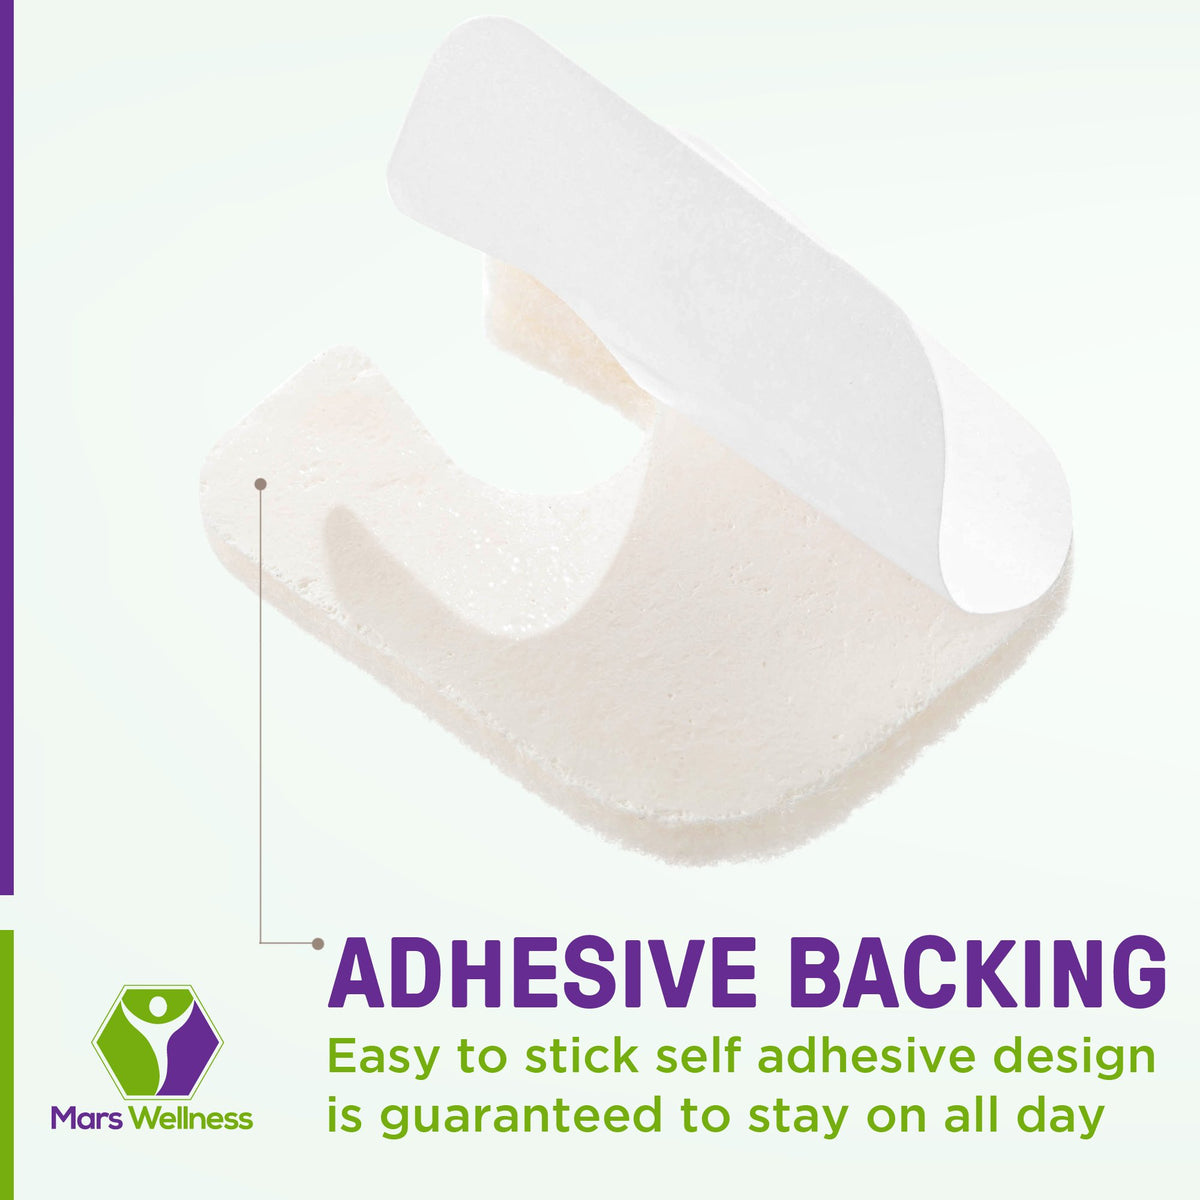 U Shaped Felt Callus Pads - Adhesive Foot Pads That Protect Calluses from Rubbing On Shoes - Skived 1/4"